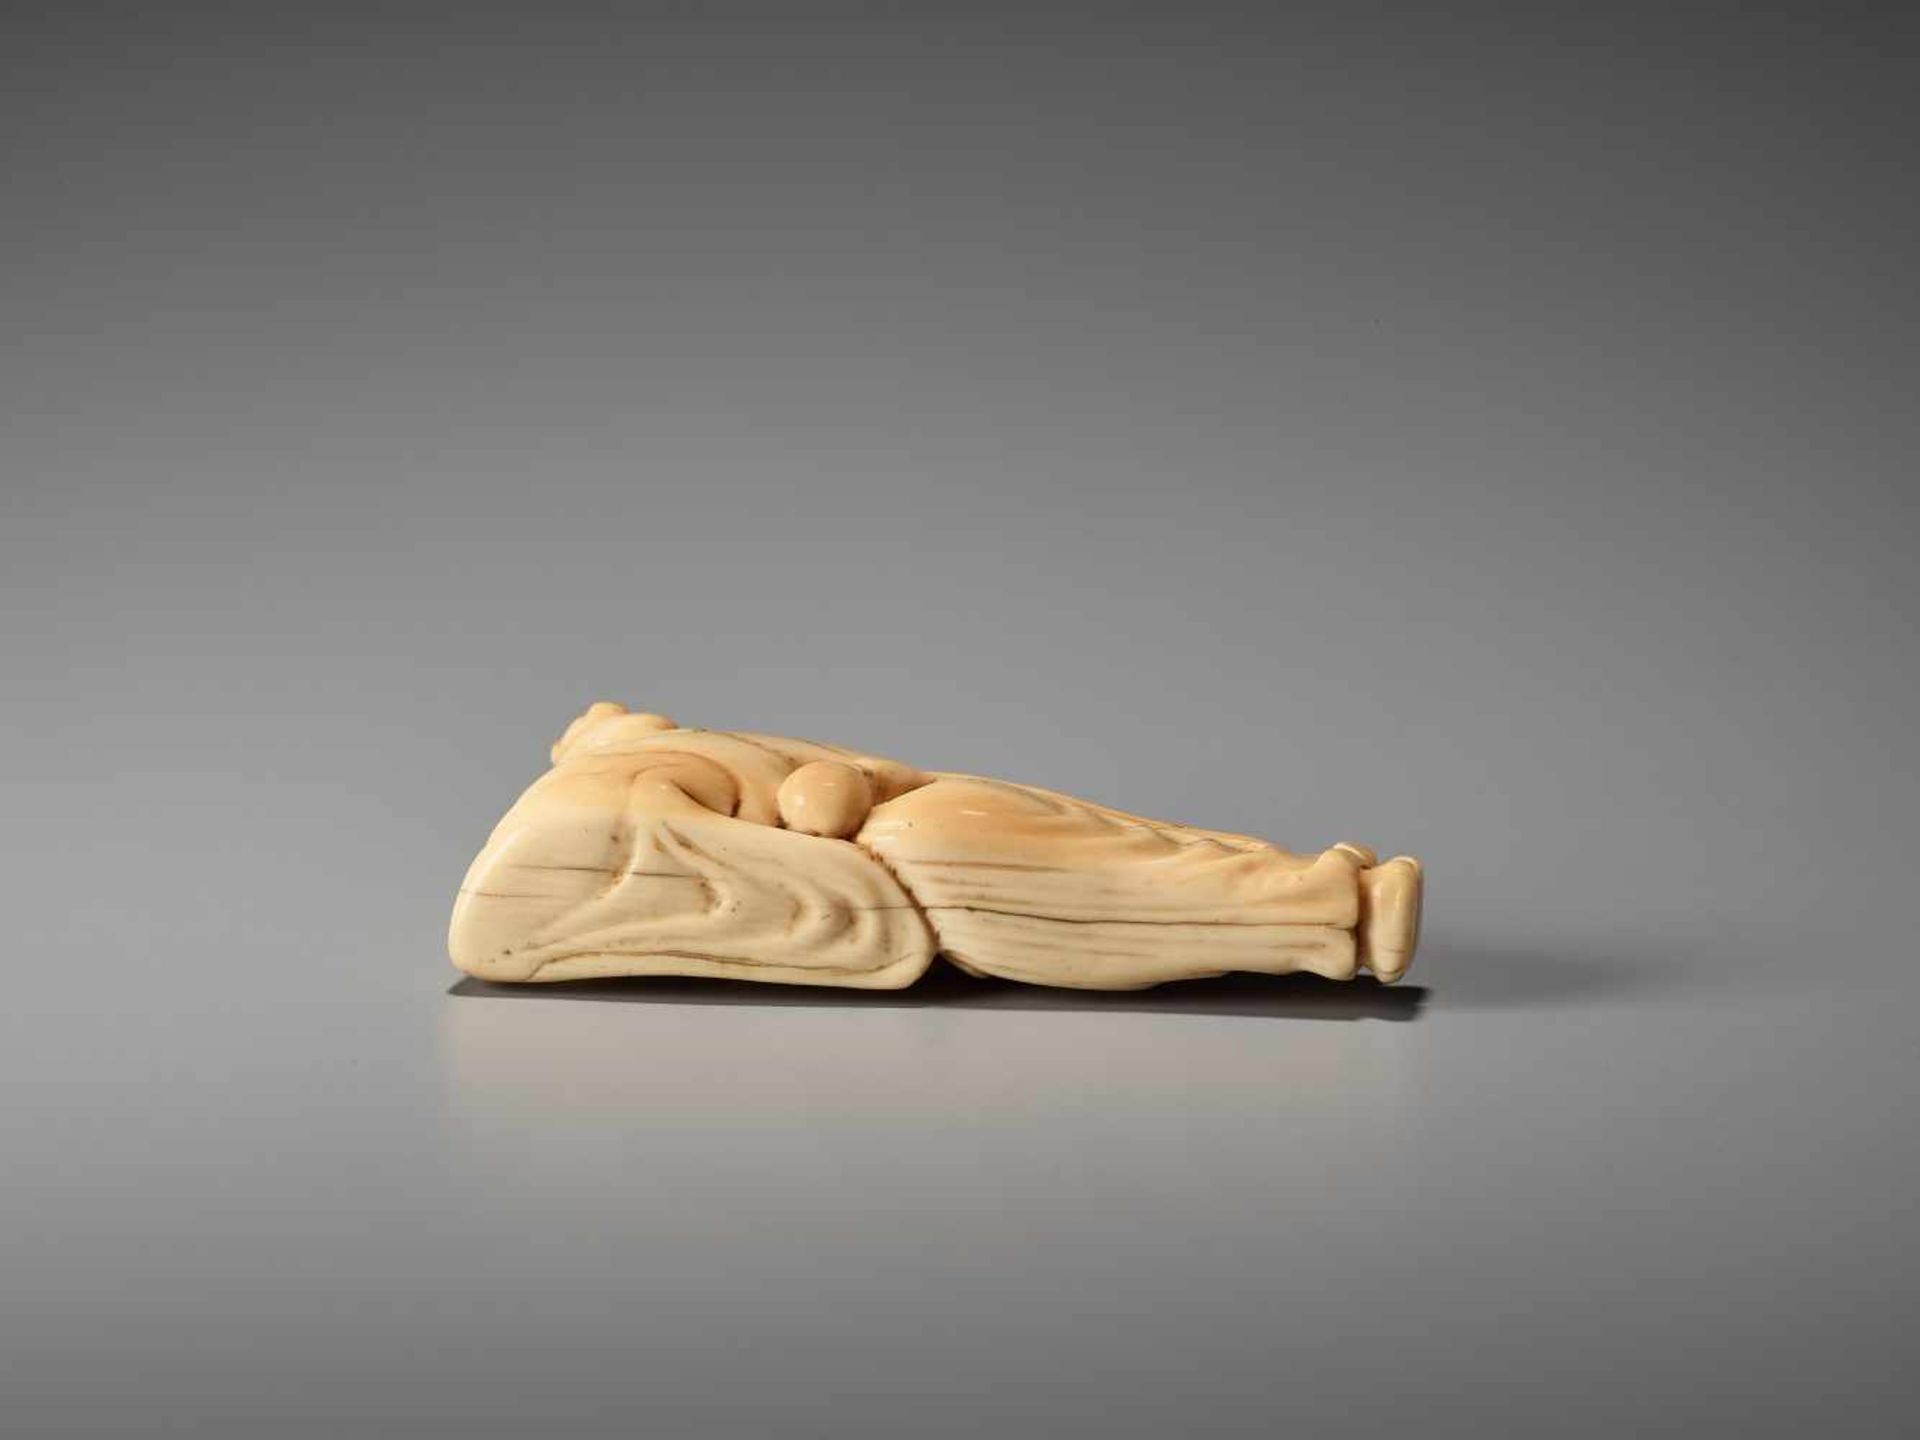 AN IVORY NETSUKE OF A RECLINING CHINESE IMMORTAL WITH A FANUnsigned, ivory netsukeJapan, late 18th - Image 6 of 6